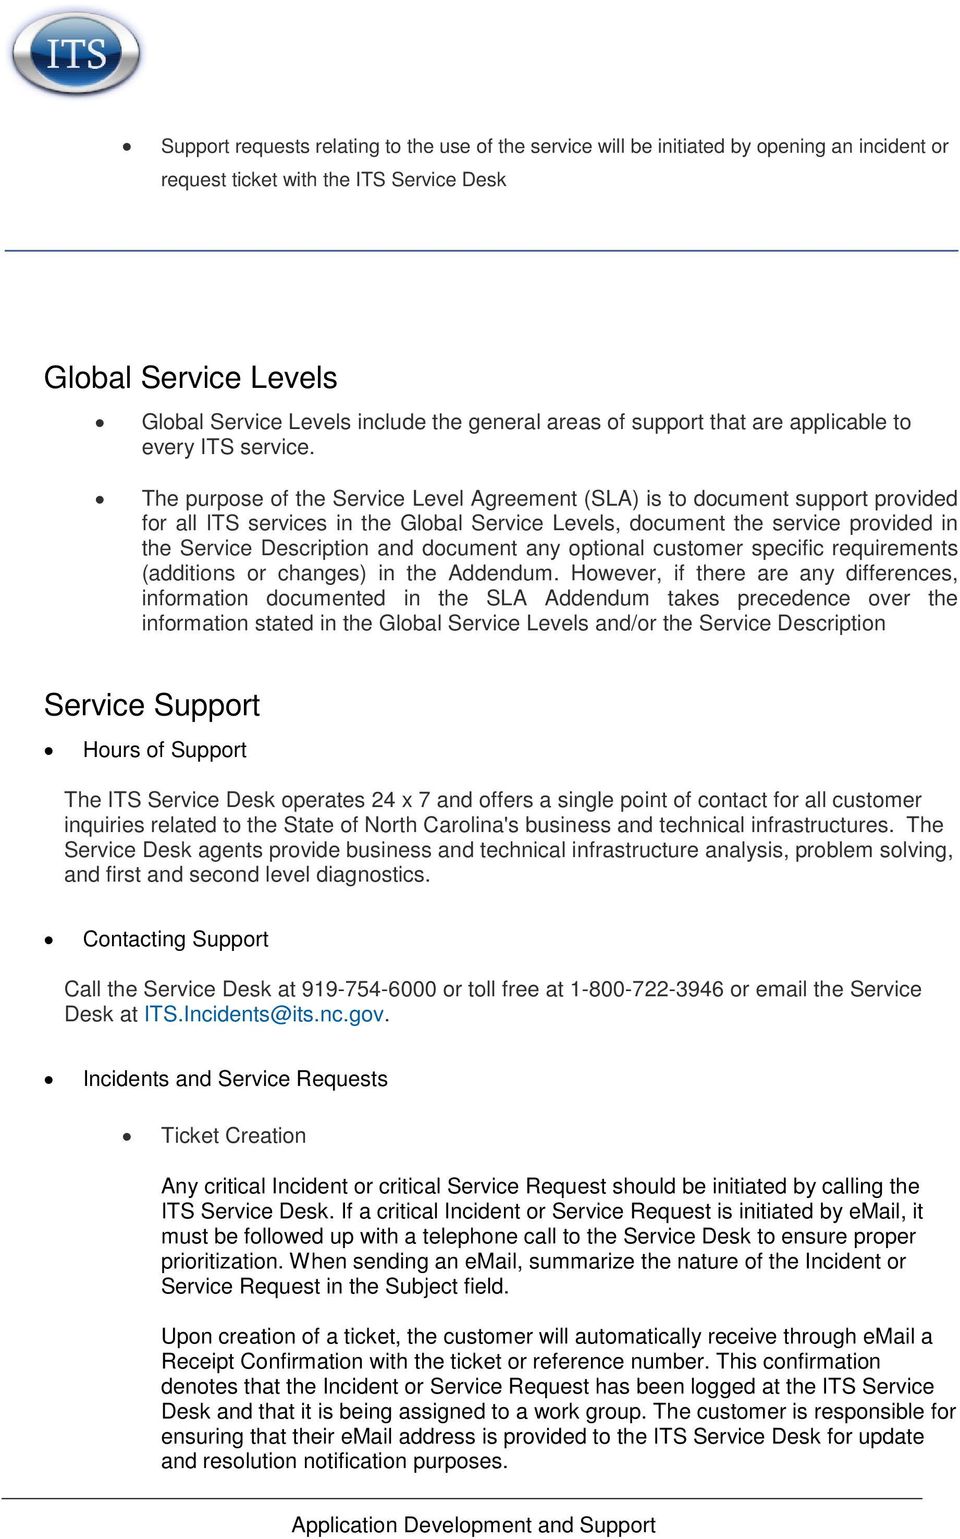 The purpose of the Service Level Agreement (SLA) is to document support provided for all ITS services in the Global Service Levels, document the service provided in the Service Description and